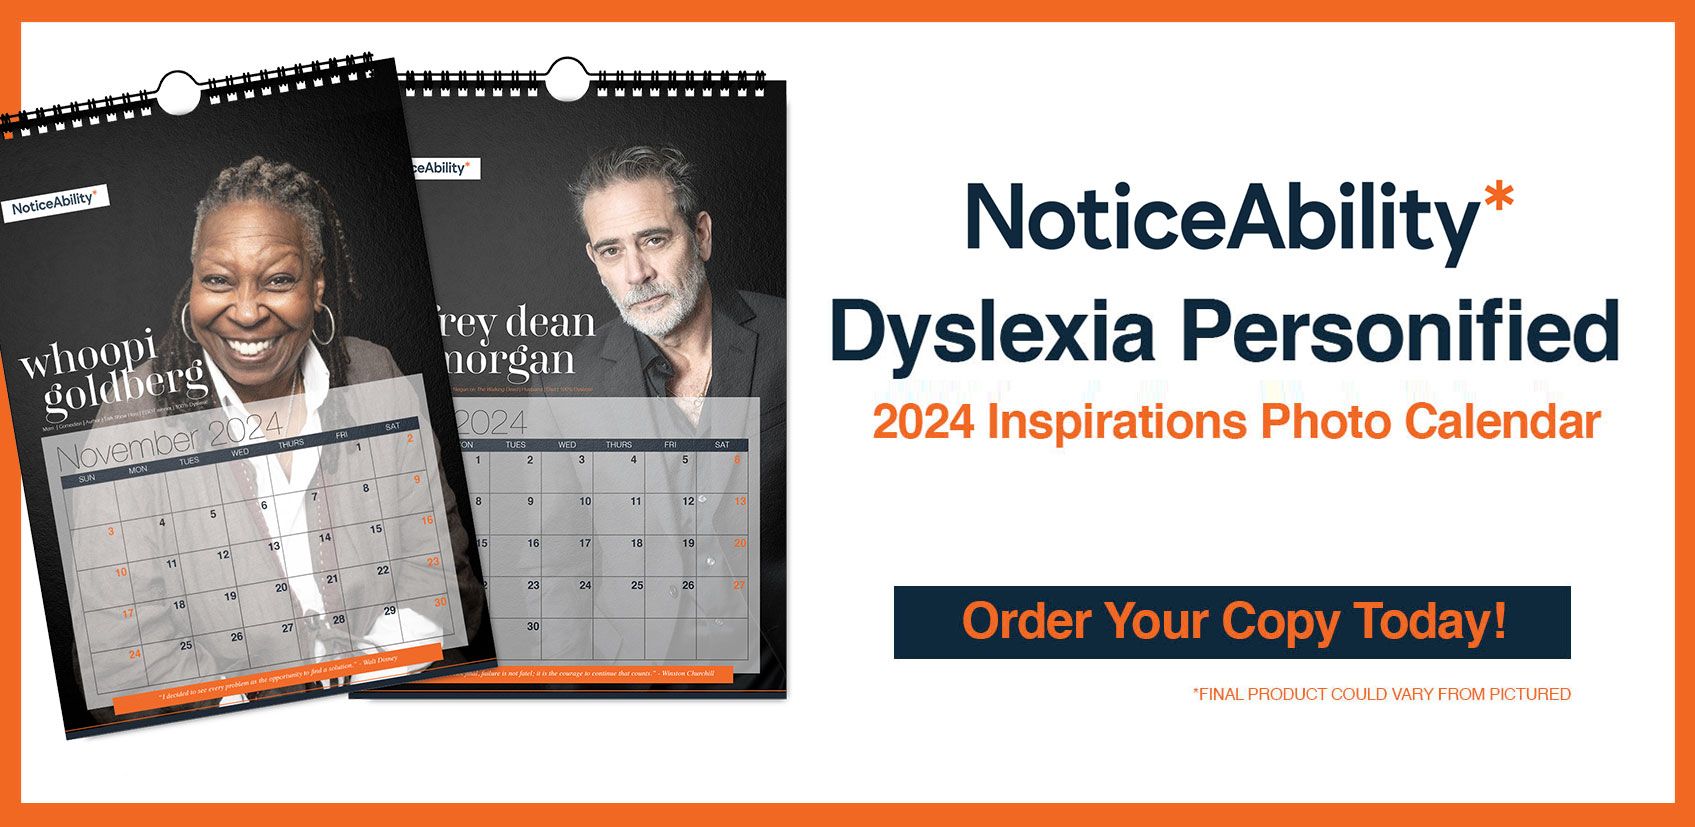 NoticeAbility* Dyslexia Personified2024 Inspirations Photo CalendarOrder Your Copy Today!